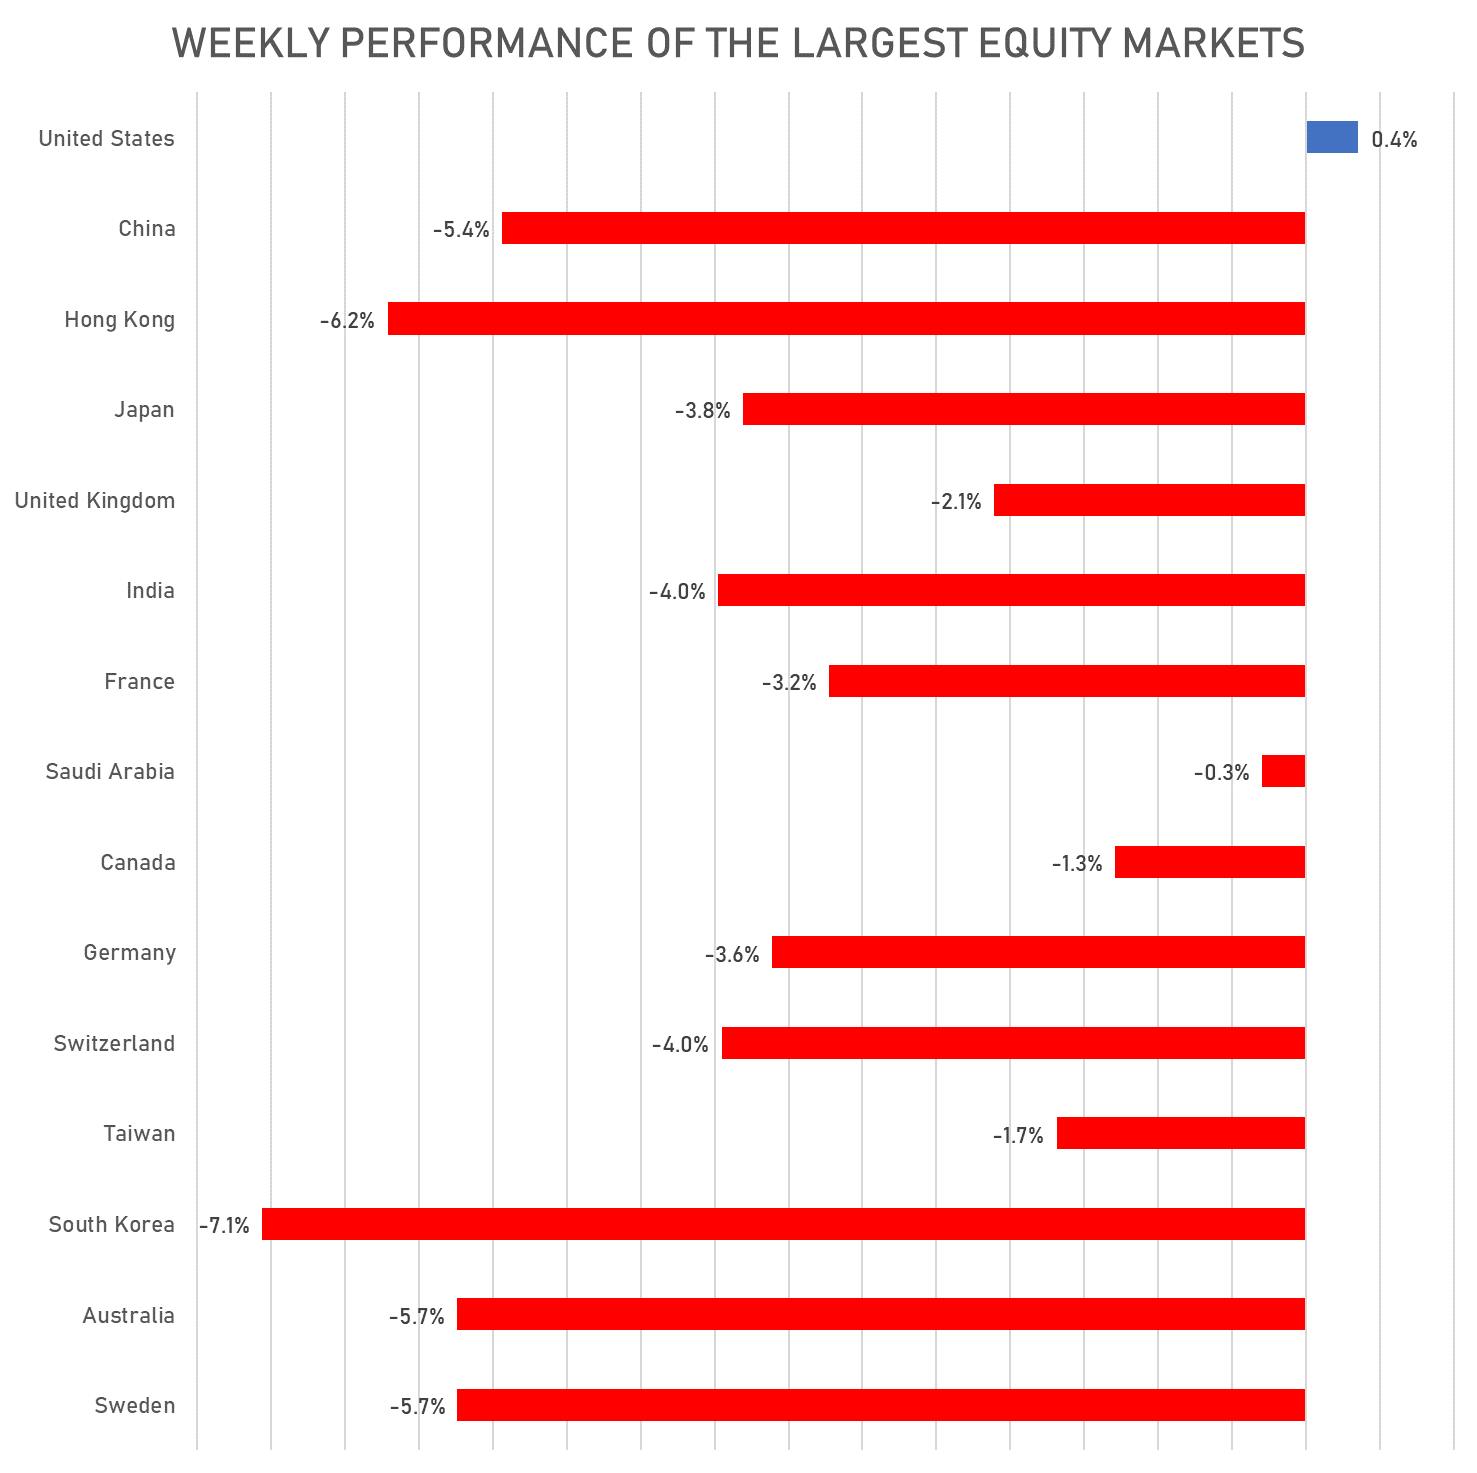 Weekly Performance of The Top Equity Markets | Sources: phipost.com, FactSet data